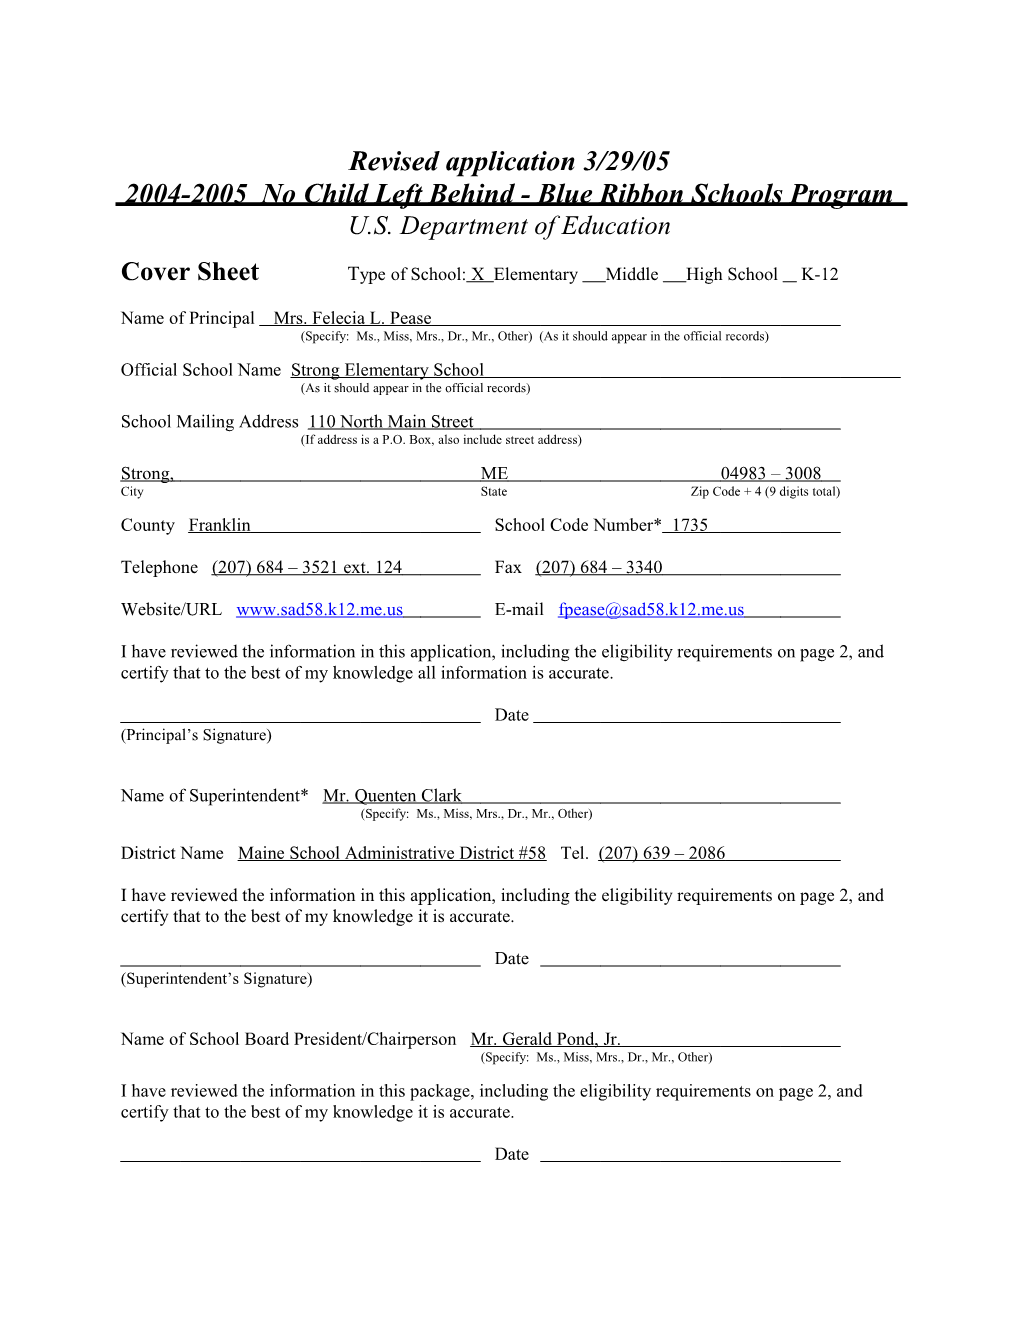 Strong Elementary School Application: 2004-2005, No Child Left Behind - Blue Ribbon Schools